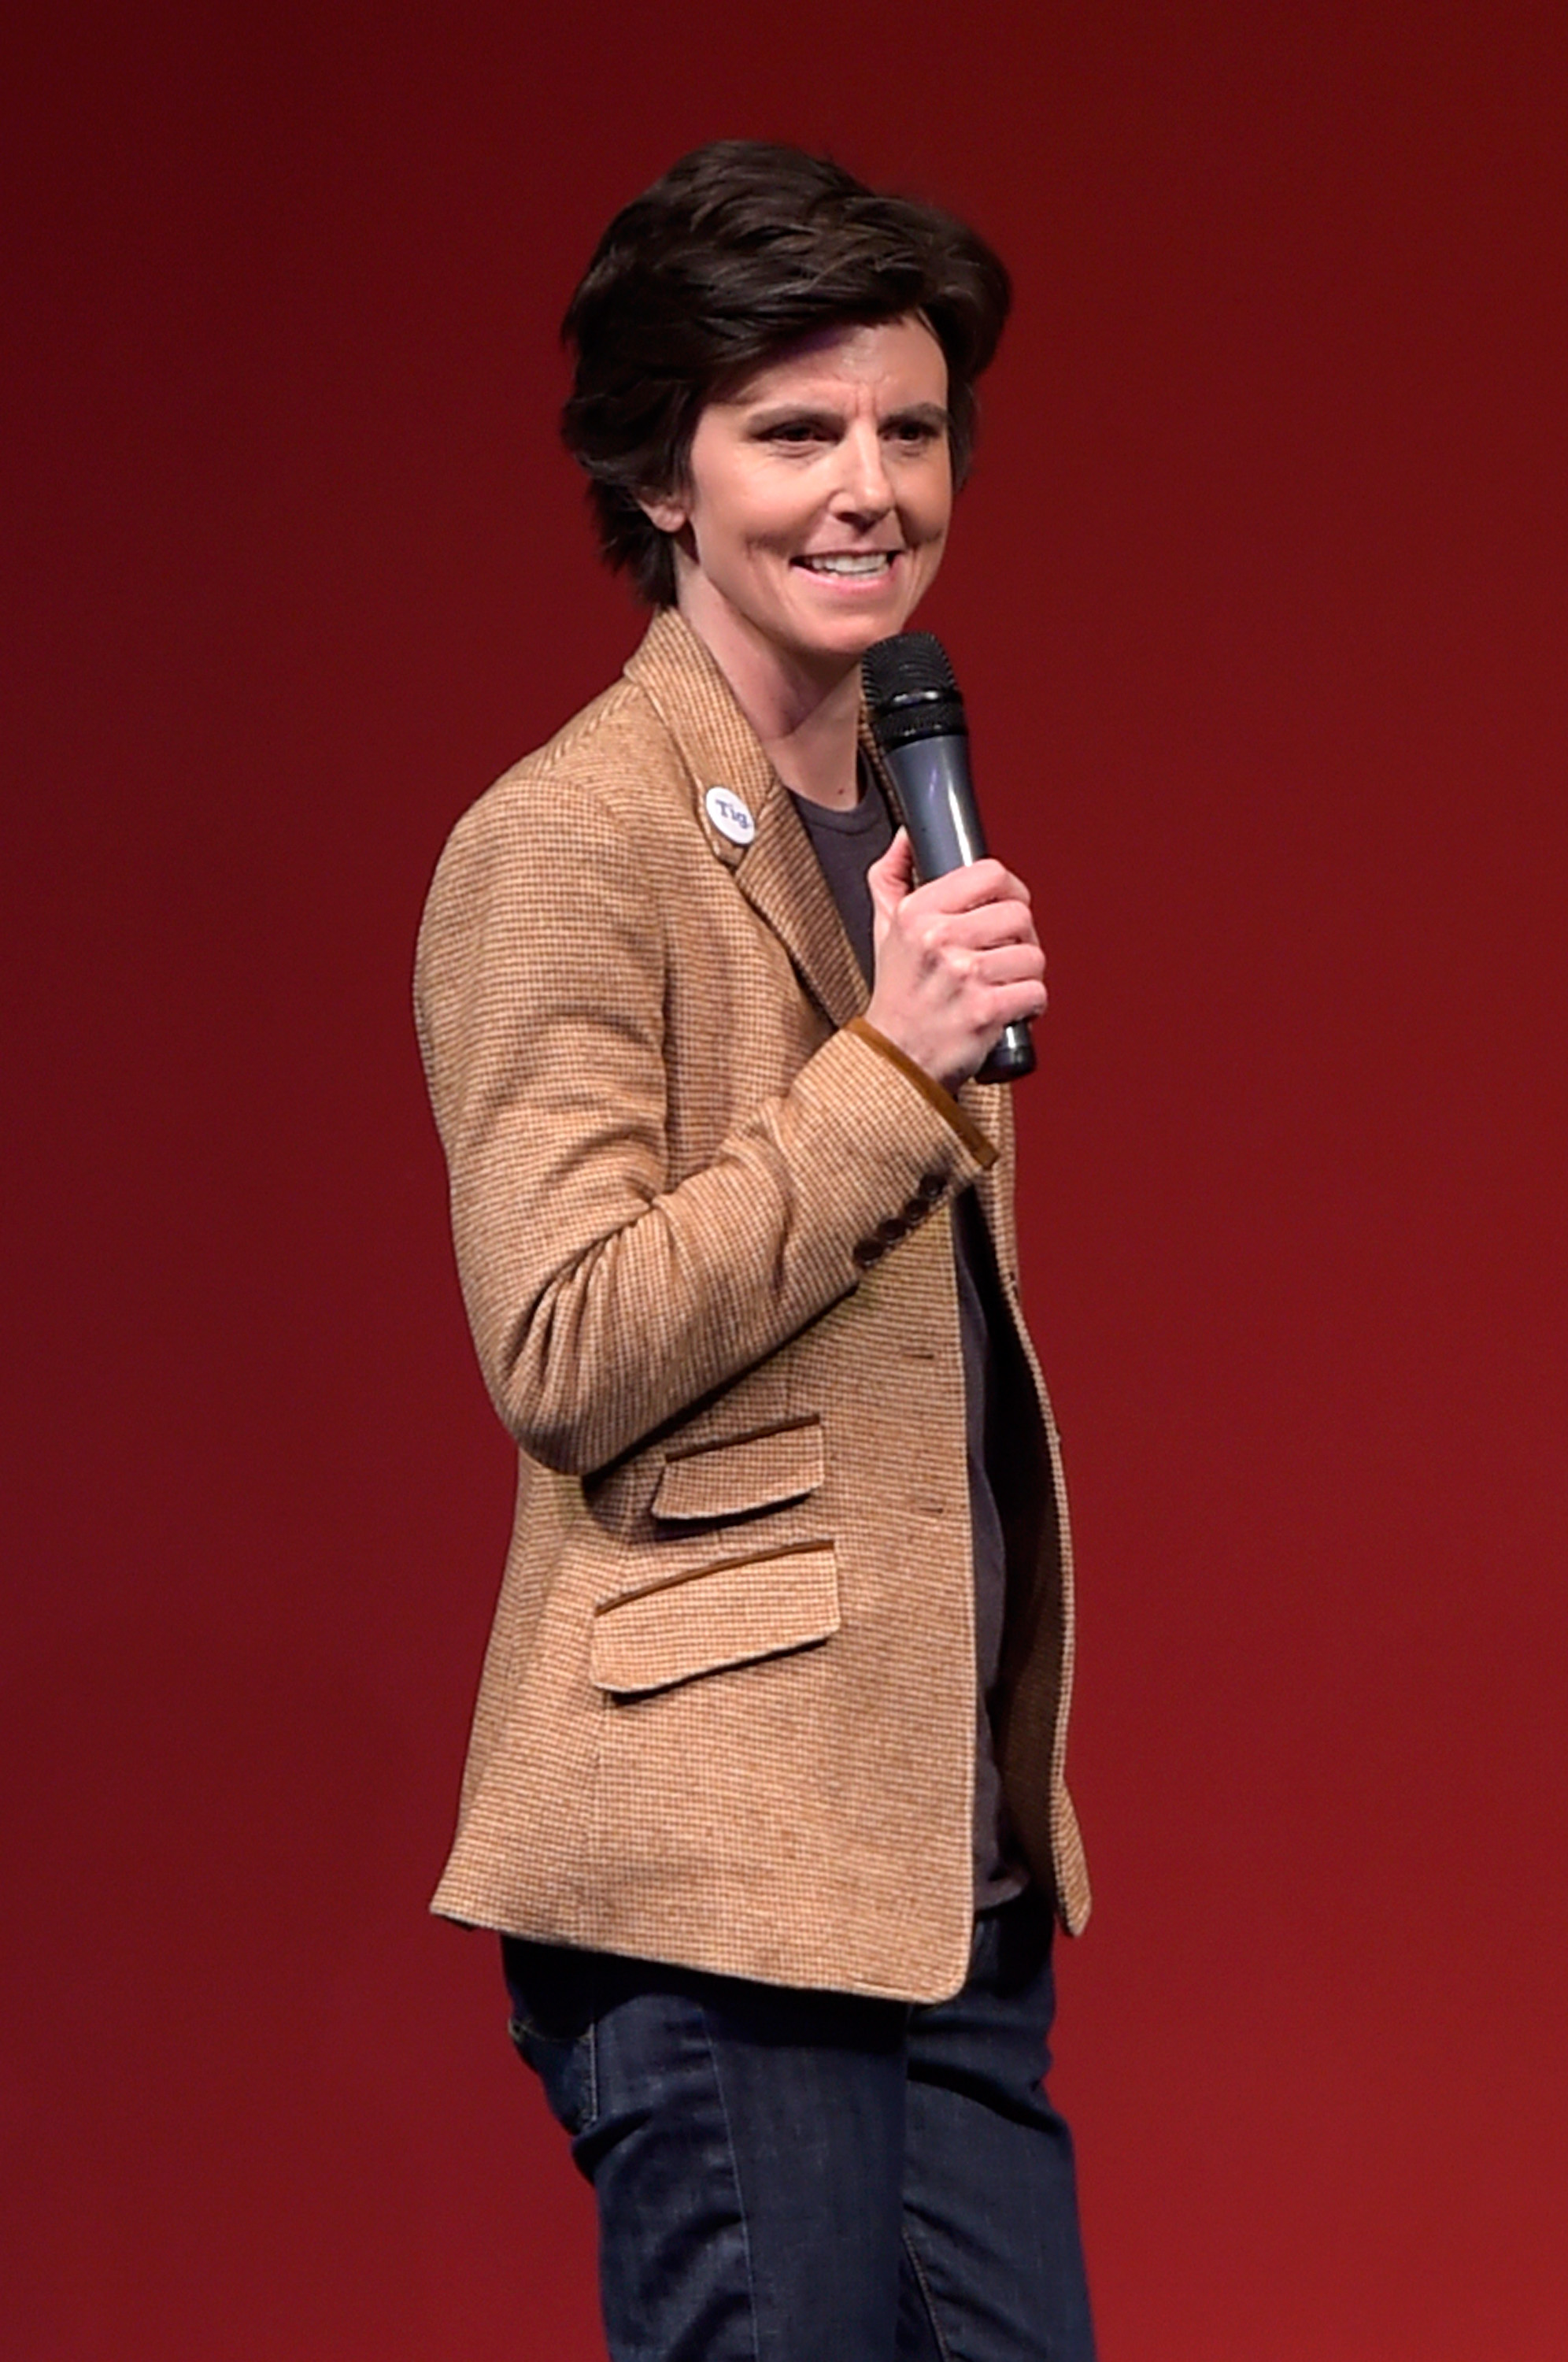 Host Tig Notaro speaks onstage at the Awards Night Ceremony during the 2015 Sundance Film Festival at the Basin Recreation Field House on January 31, 2015 in Park City, Utah. (Michael Loccisano&amp;mdash;Sundance/ Getty Images)